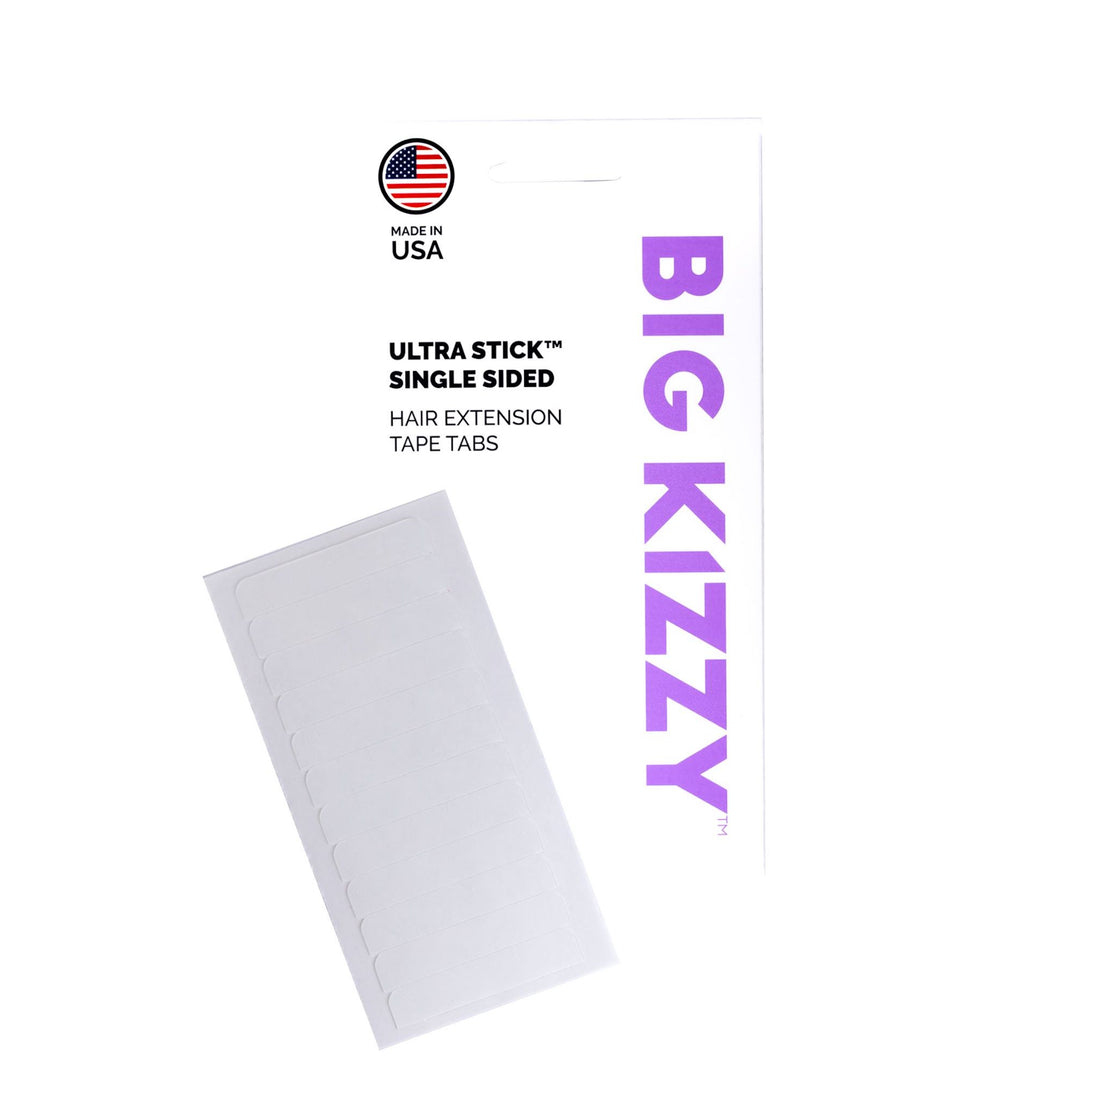 Big Kizzy® Ultra Stick Single Sided Hair Extension Replacement Tape Tabs Packaging with a sheet of white single sided tape tabs overlayed on top of it